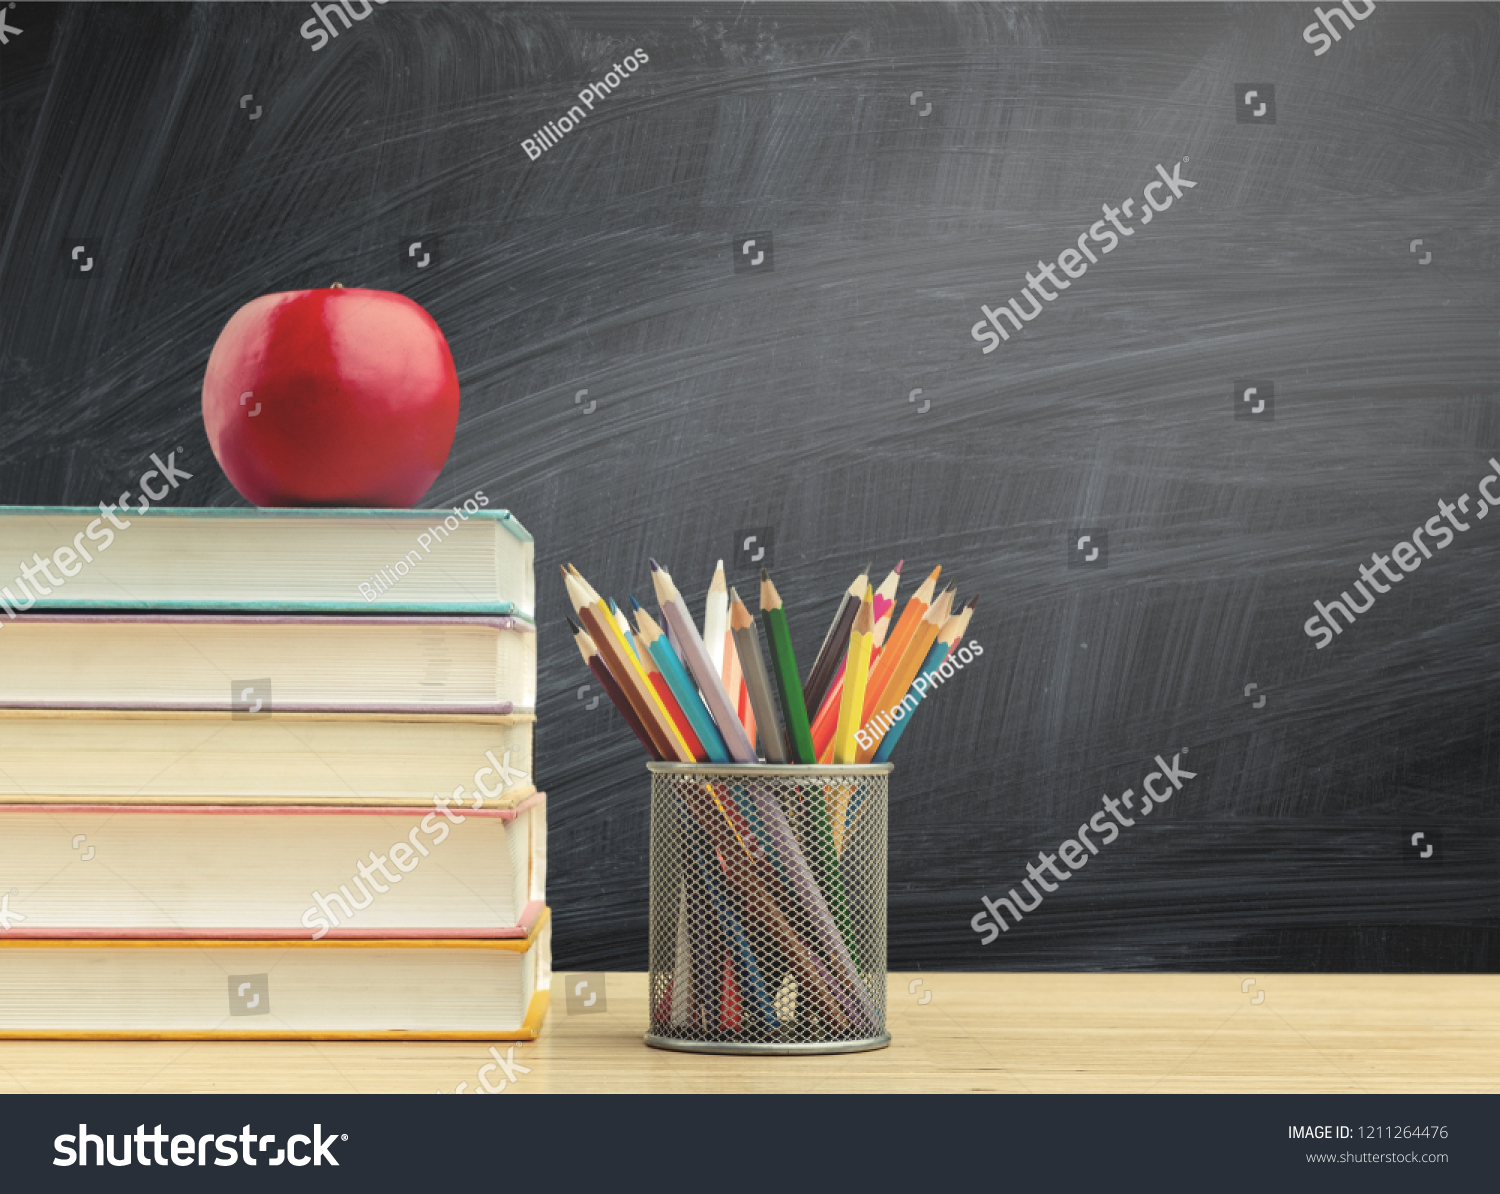 Back to school background with books and apple over blackboard #1211264476